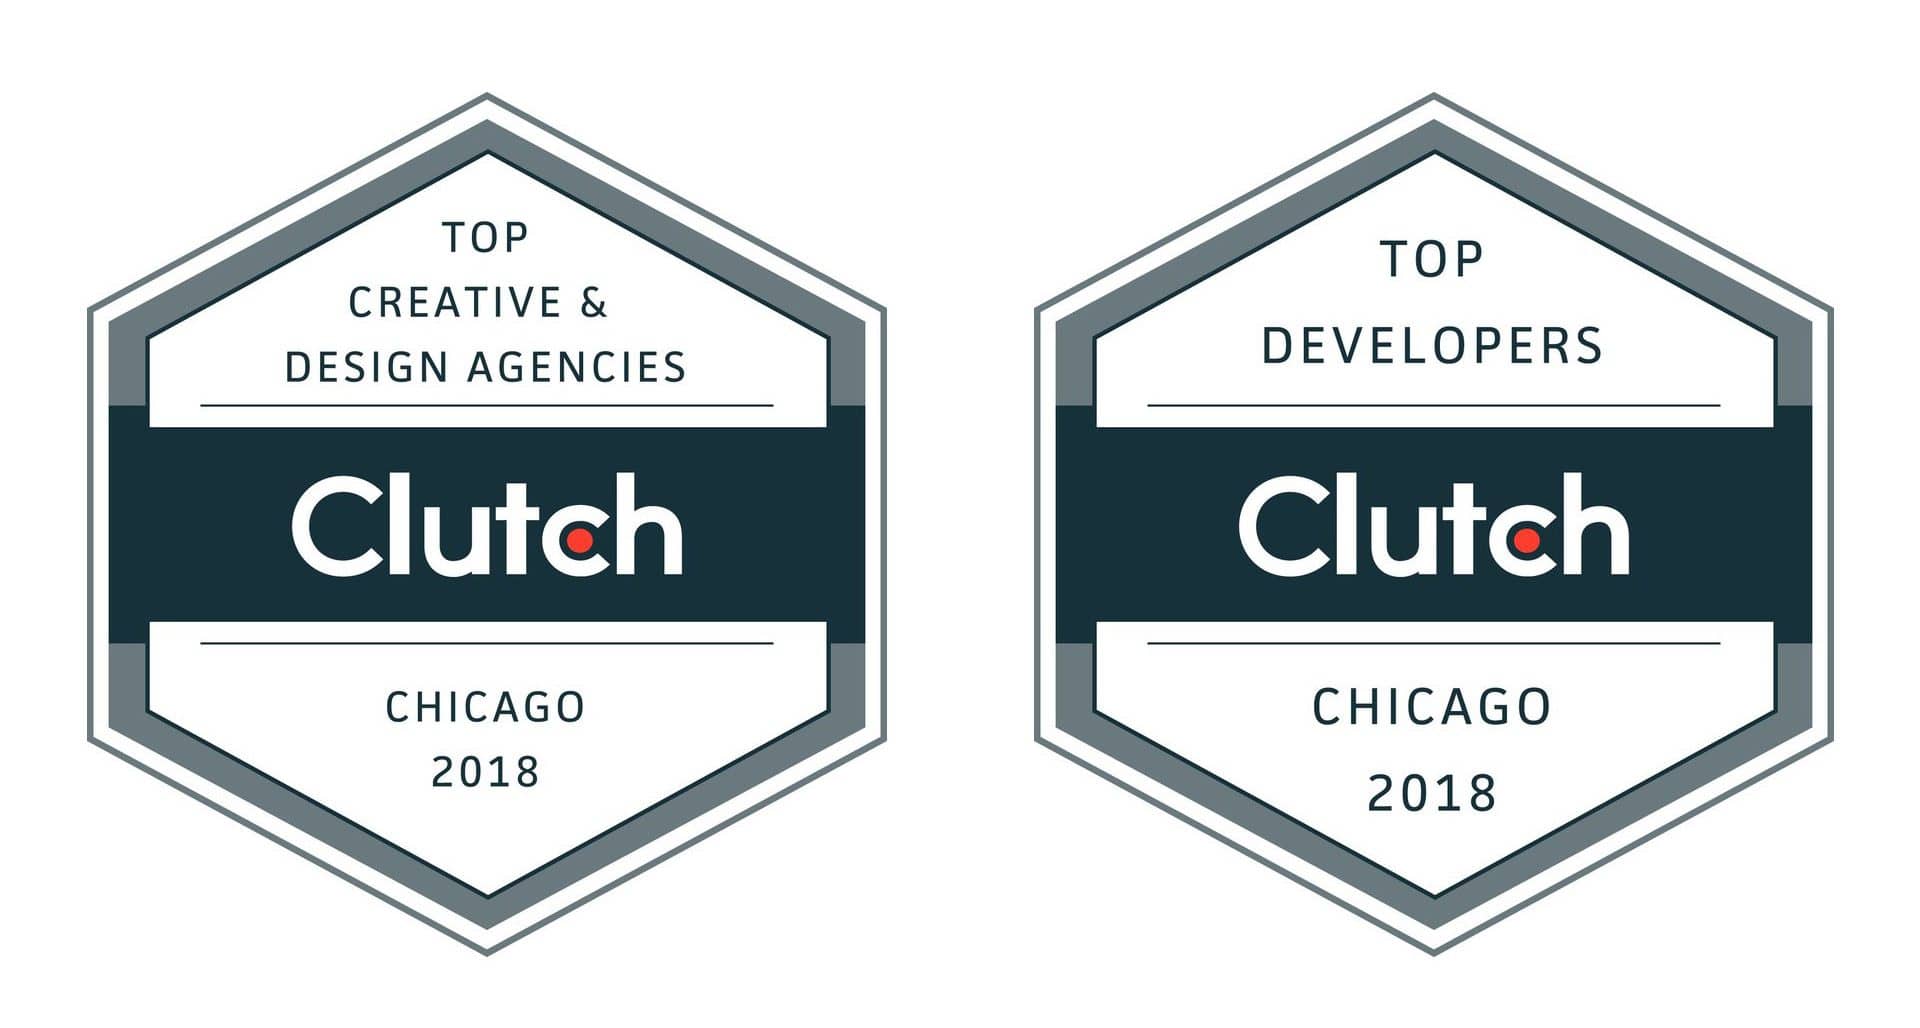 Clutch Top Design and Creative Agency Chicago 2018